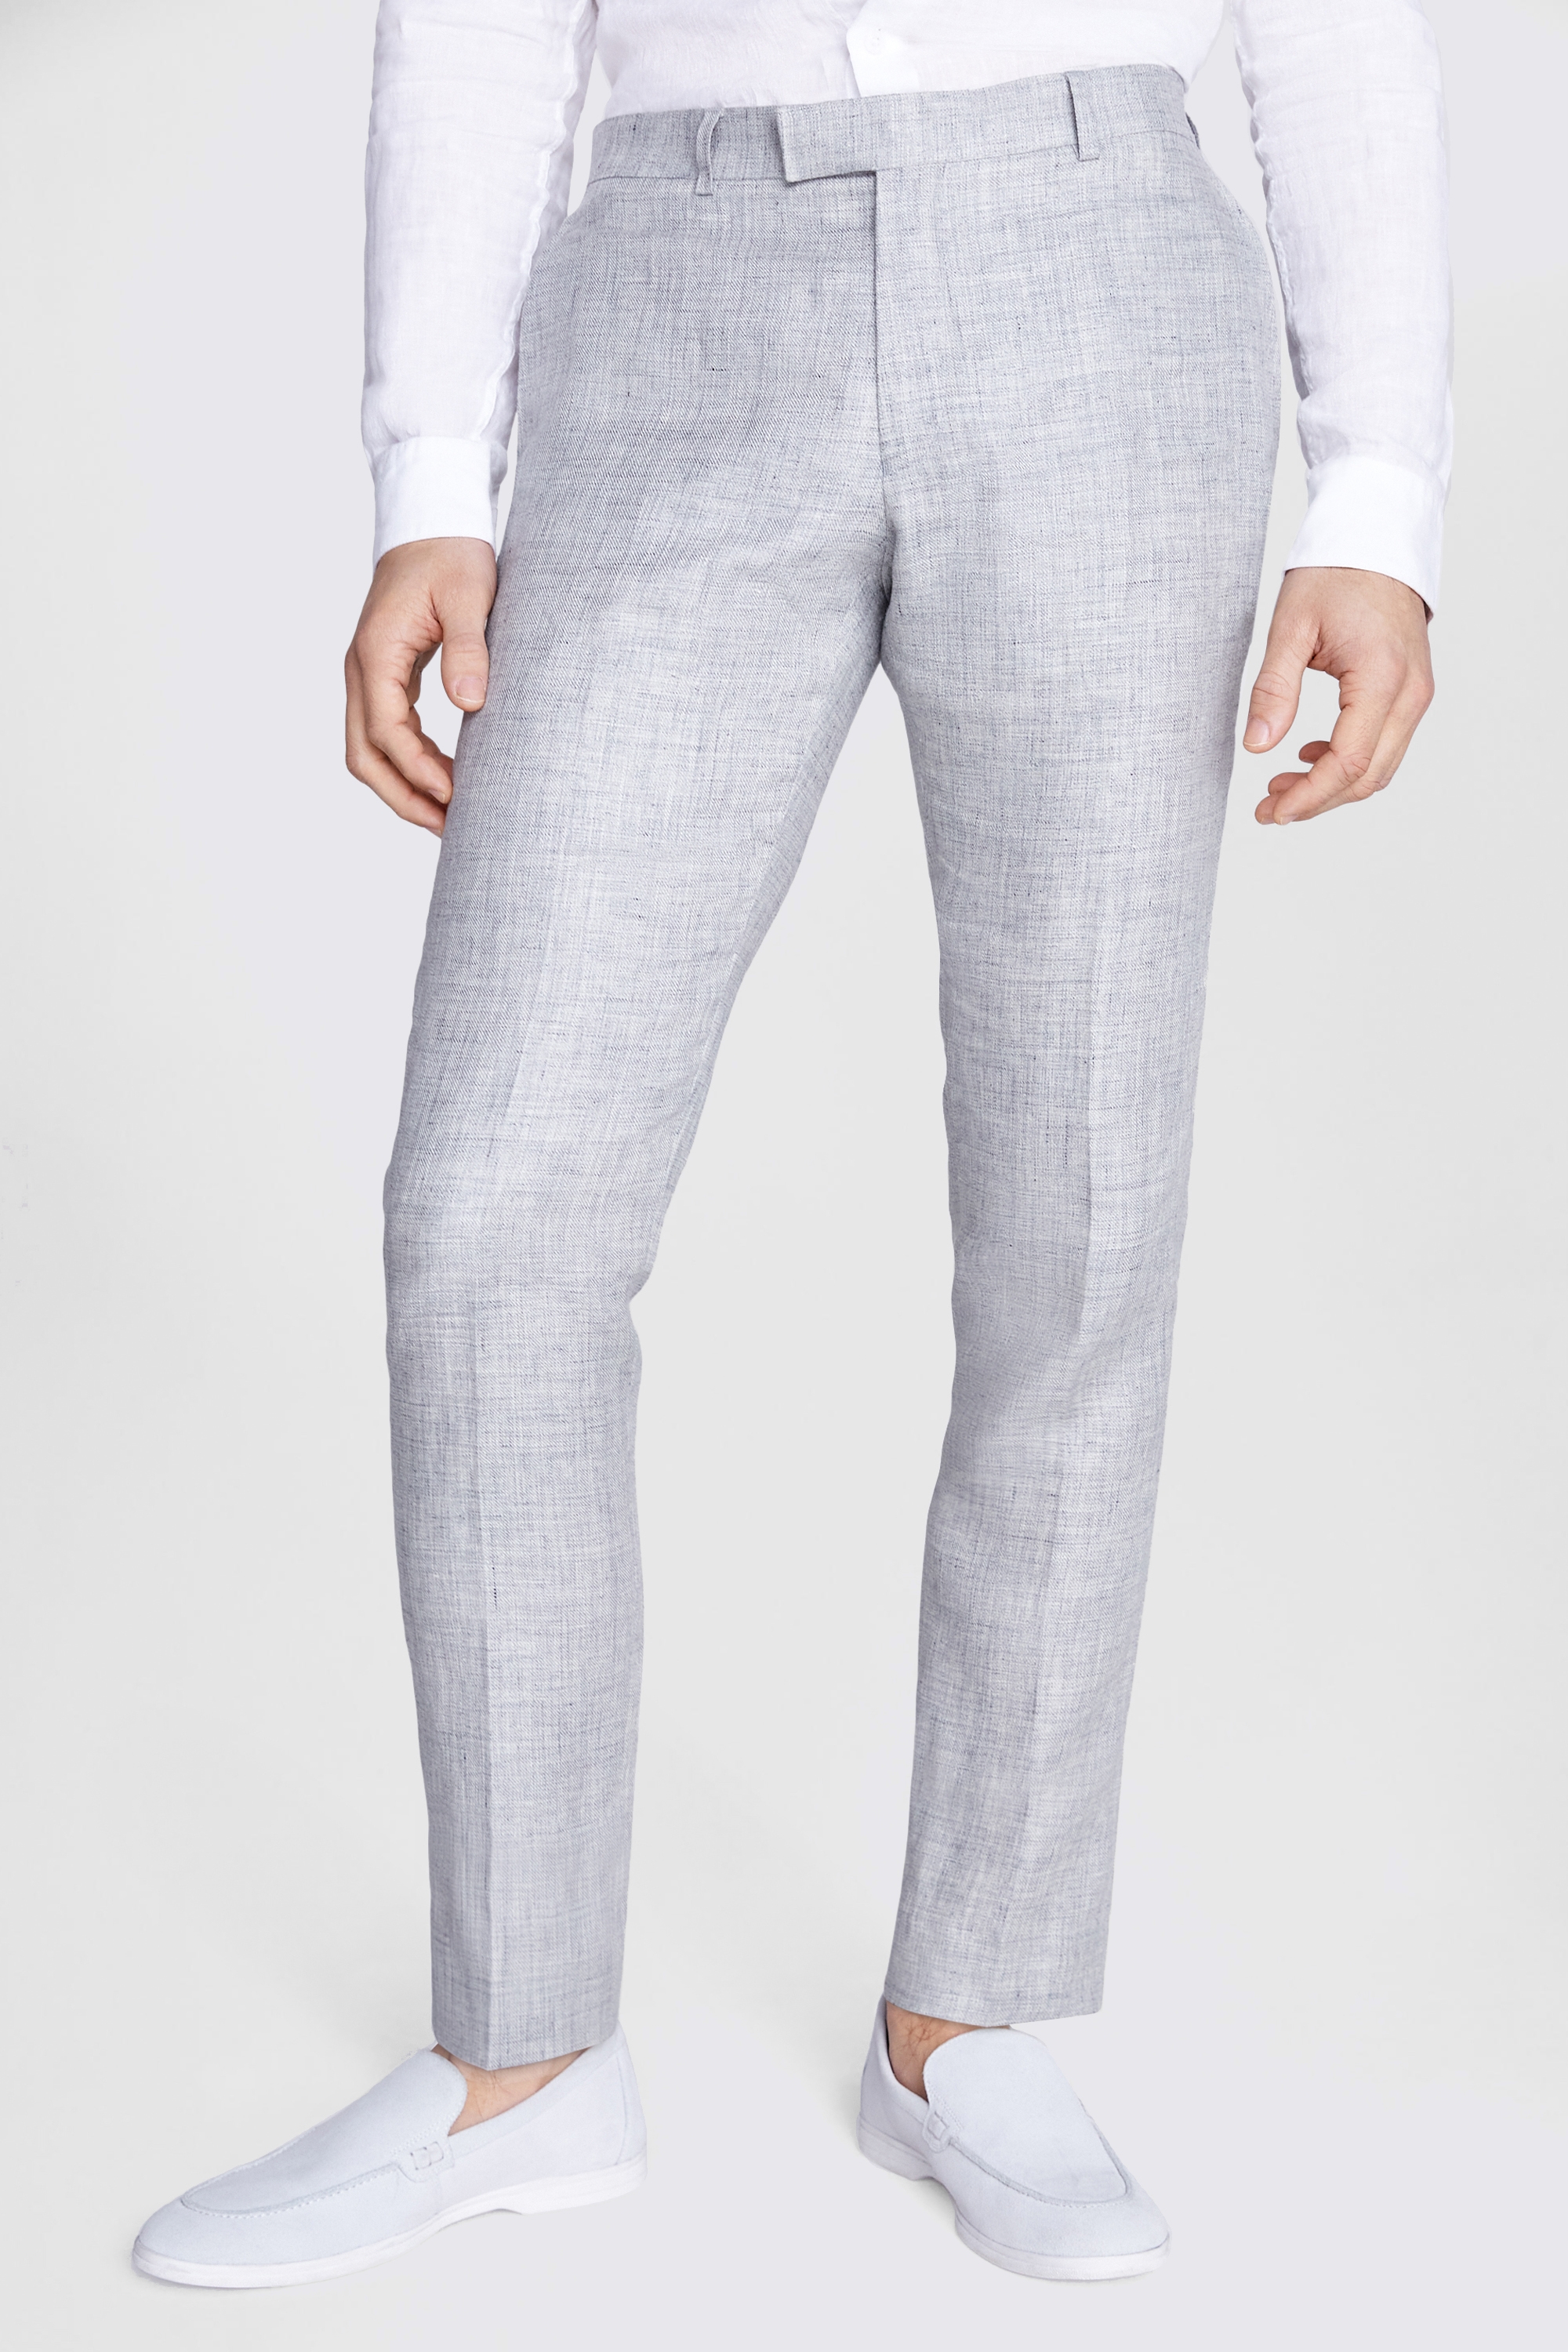 Buy Ivory White Linen Trouser for Men  Beyours  Page 6